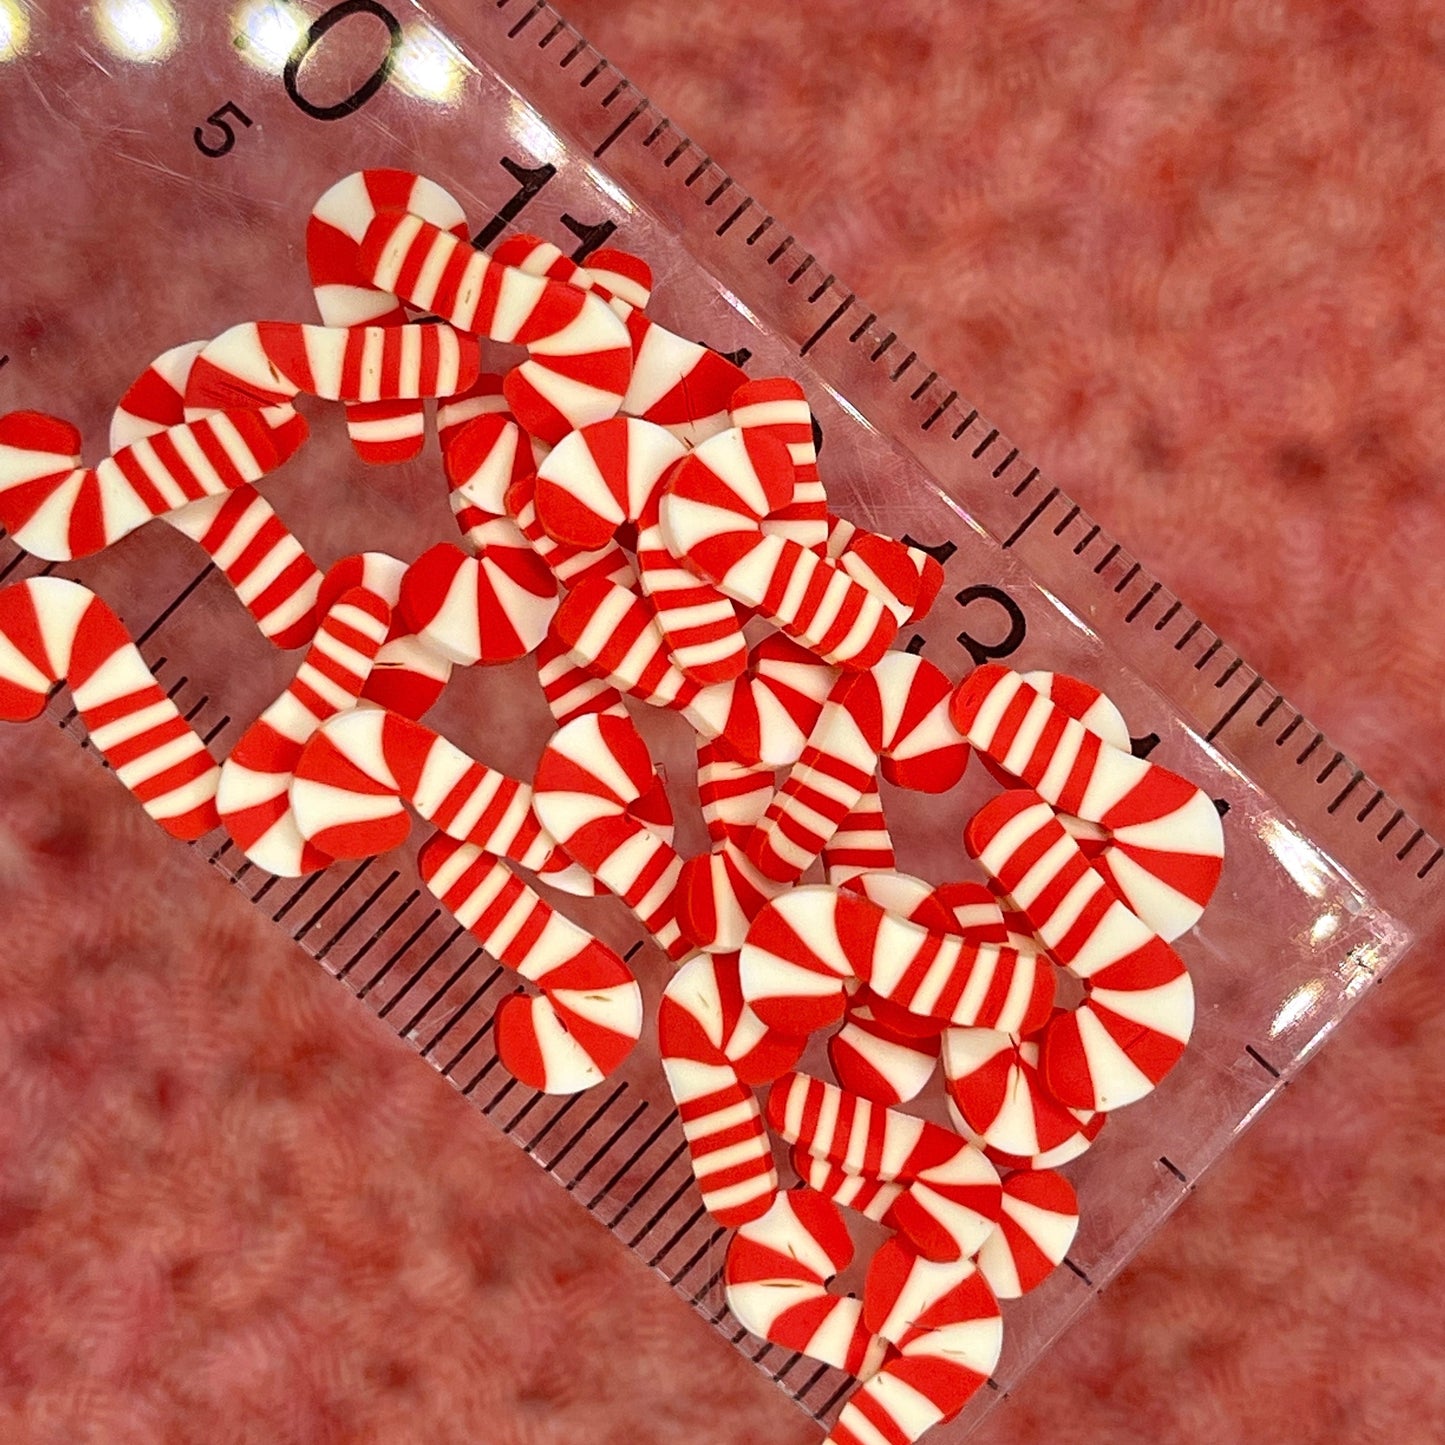 FAKE 5MM/10MM Candy Cane Slices Polymer Clay Sprinkle (NOT EDIBLE) D23-02 (5MM) | D23-11 (10MM)